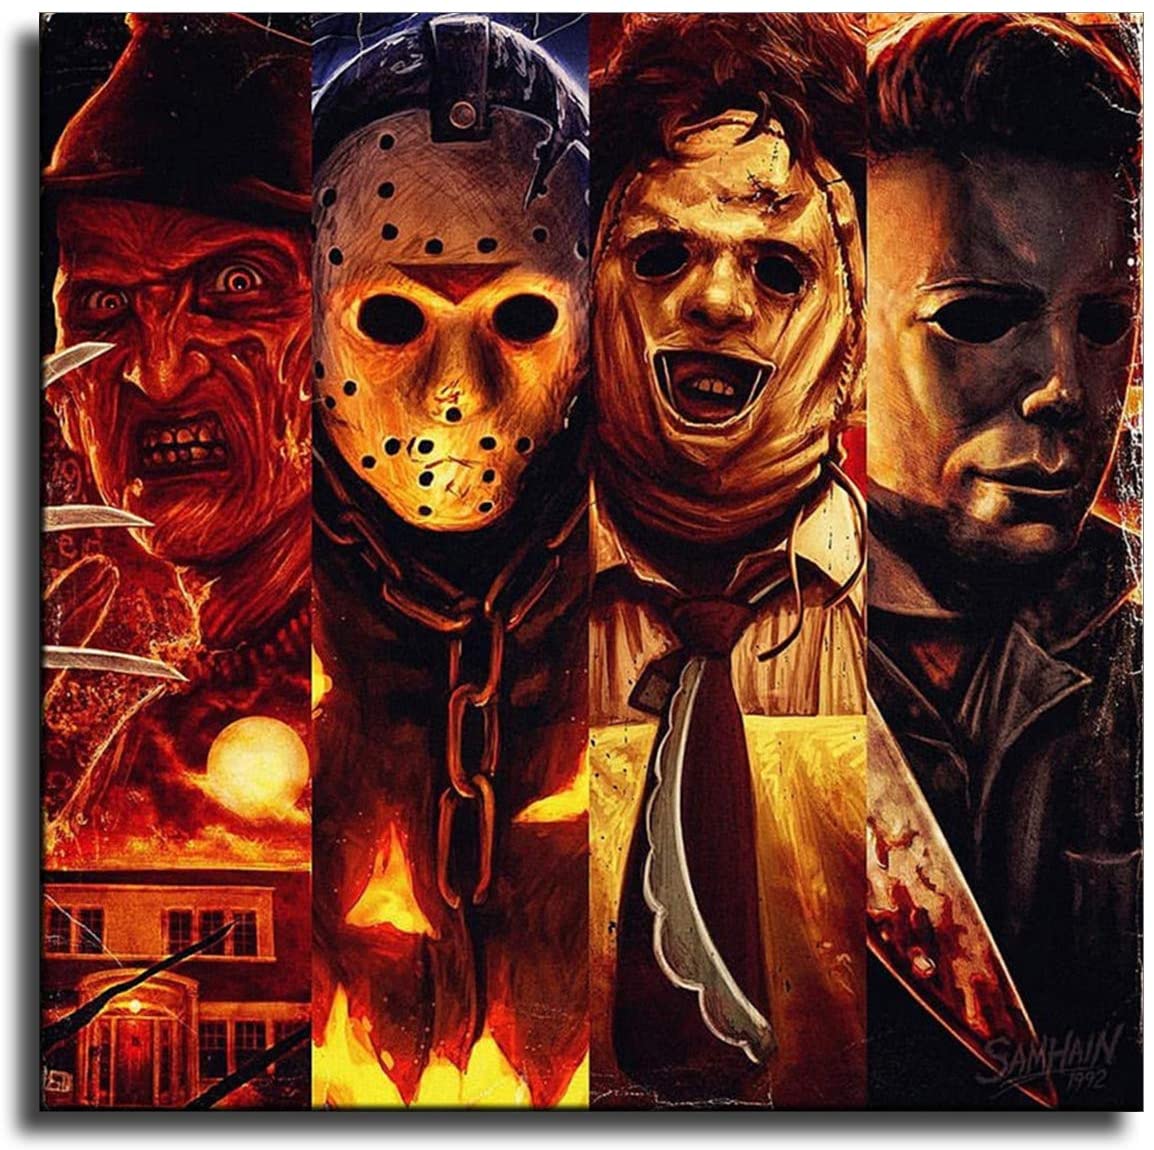 Art Details About G 160 Michael Myers Vs Jason Voorhees Horror Movie Fabric Poster 18 24x36 27x40 Art Posters